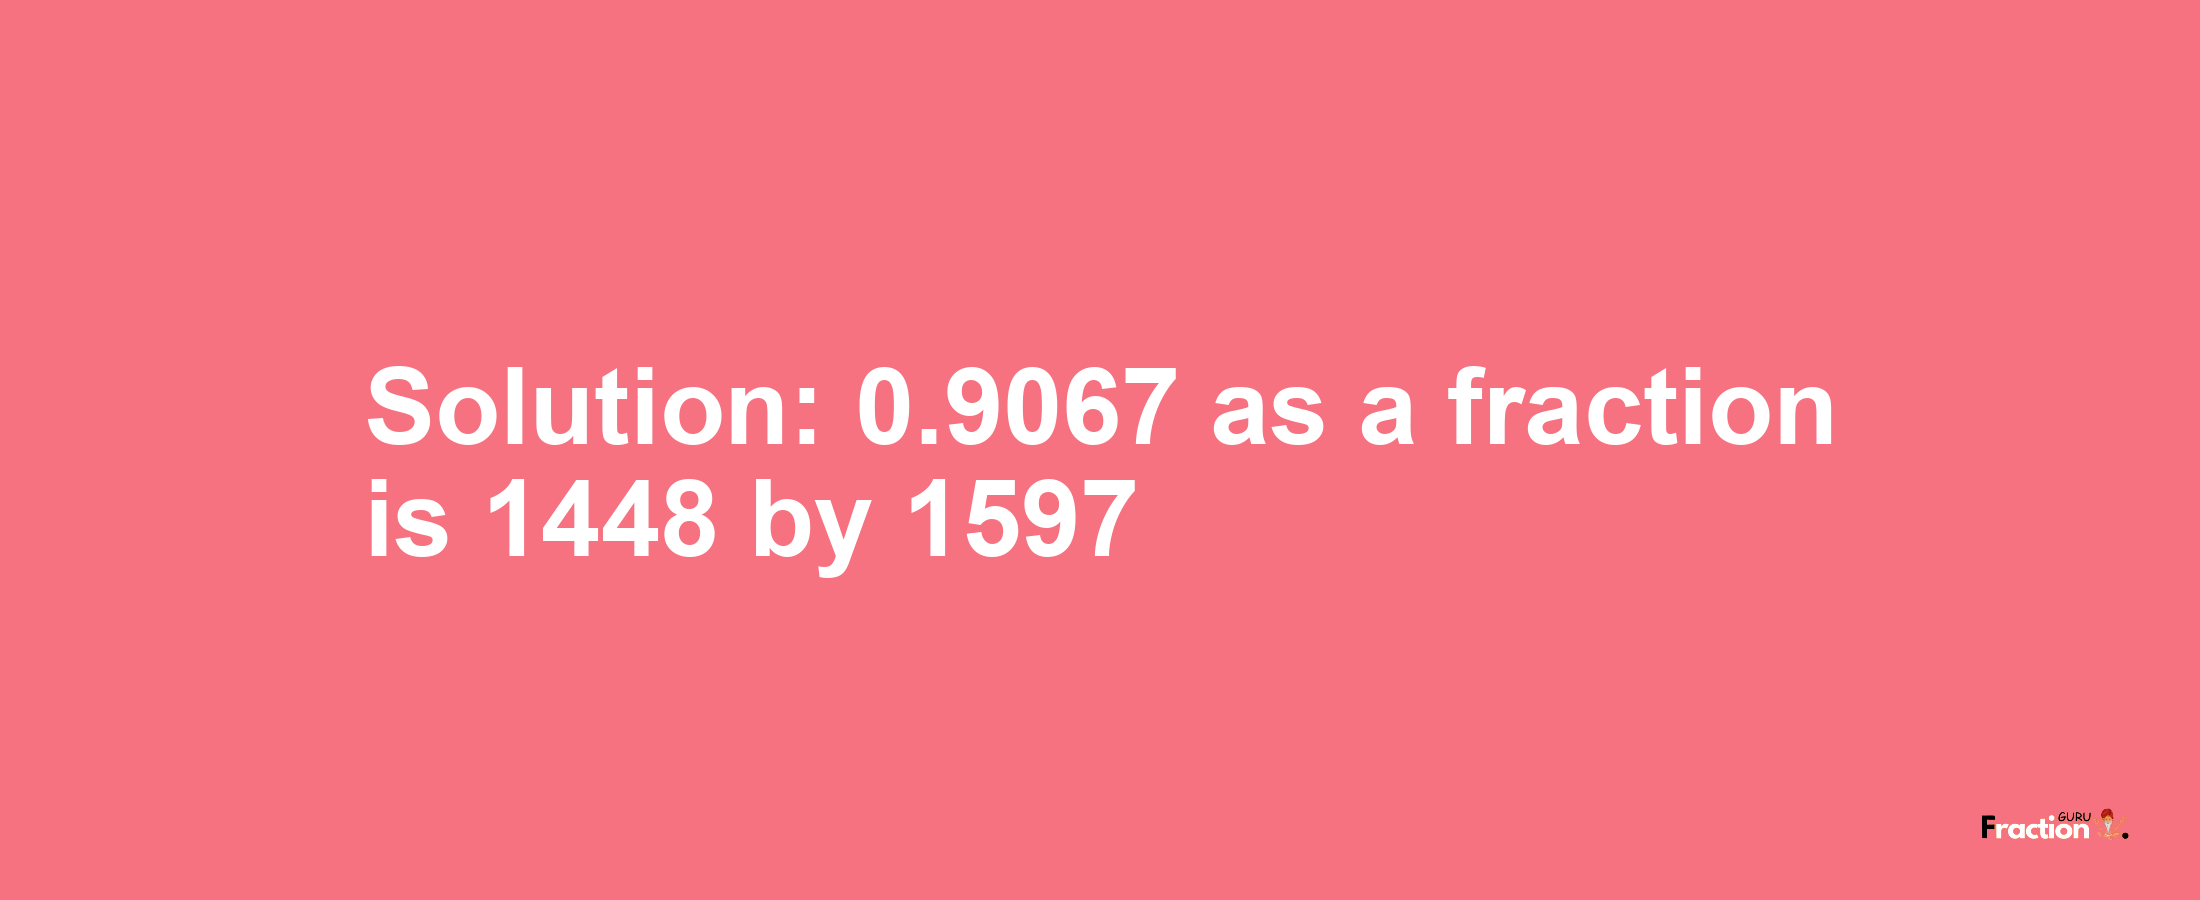 Solution:0.9067 as a fraction is 1448/1597